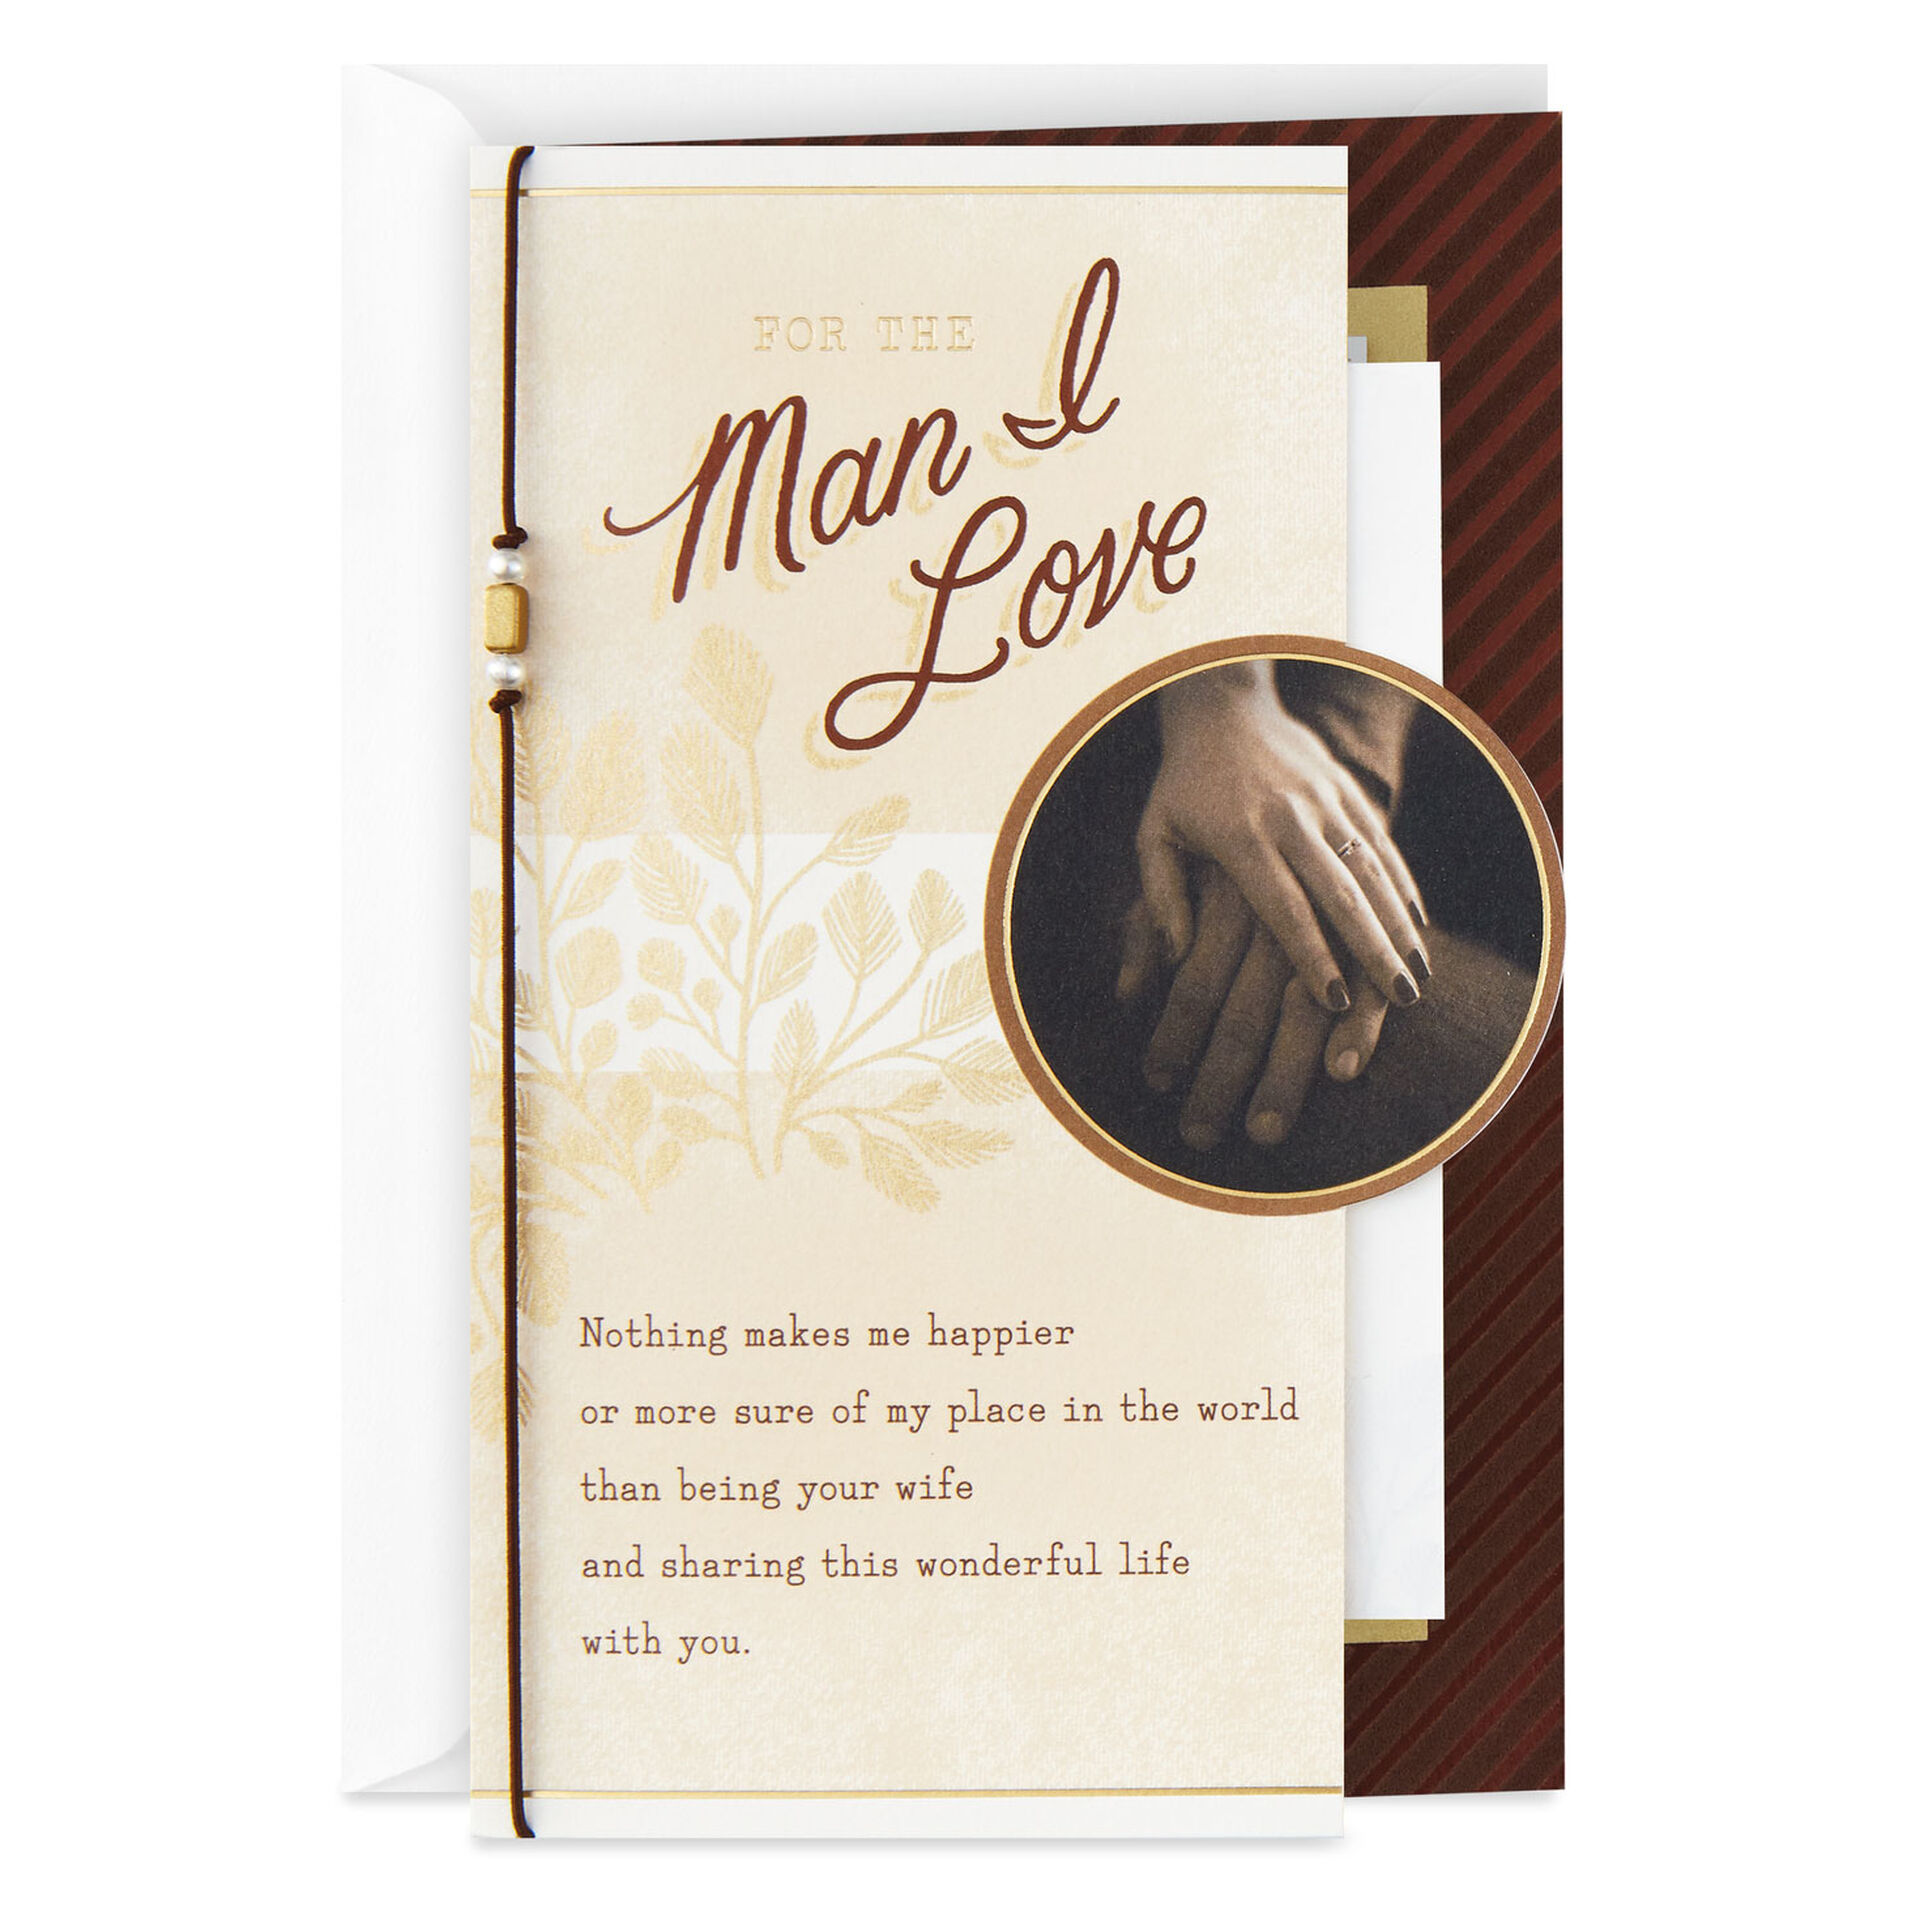 Holding-Hands-Anniversary-Card-for-Man-I-Love_699AVY2902_01